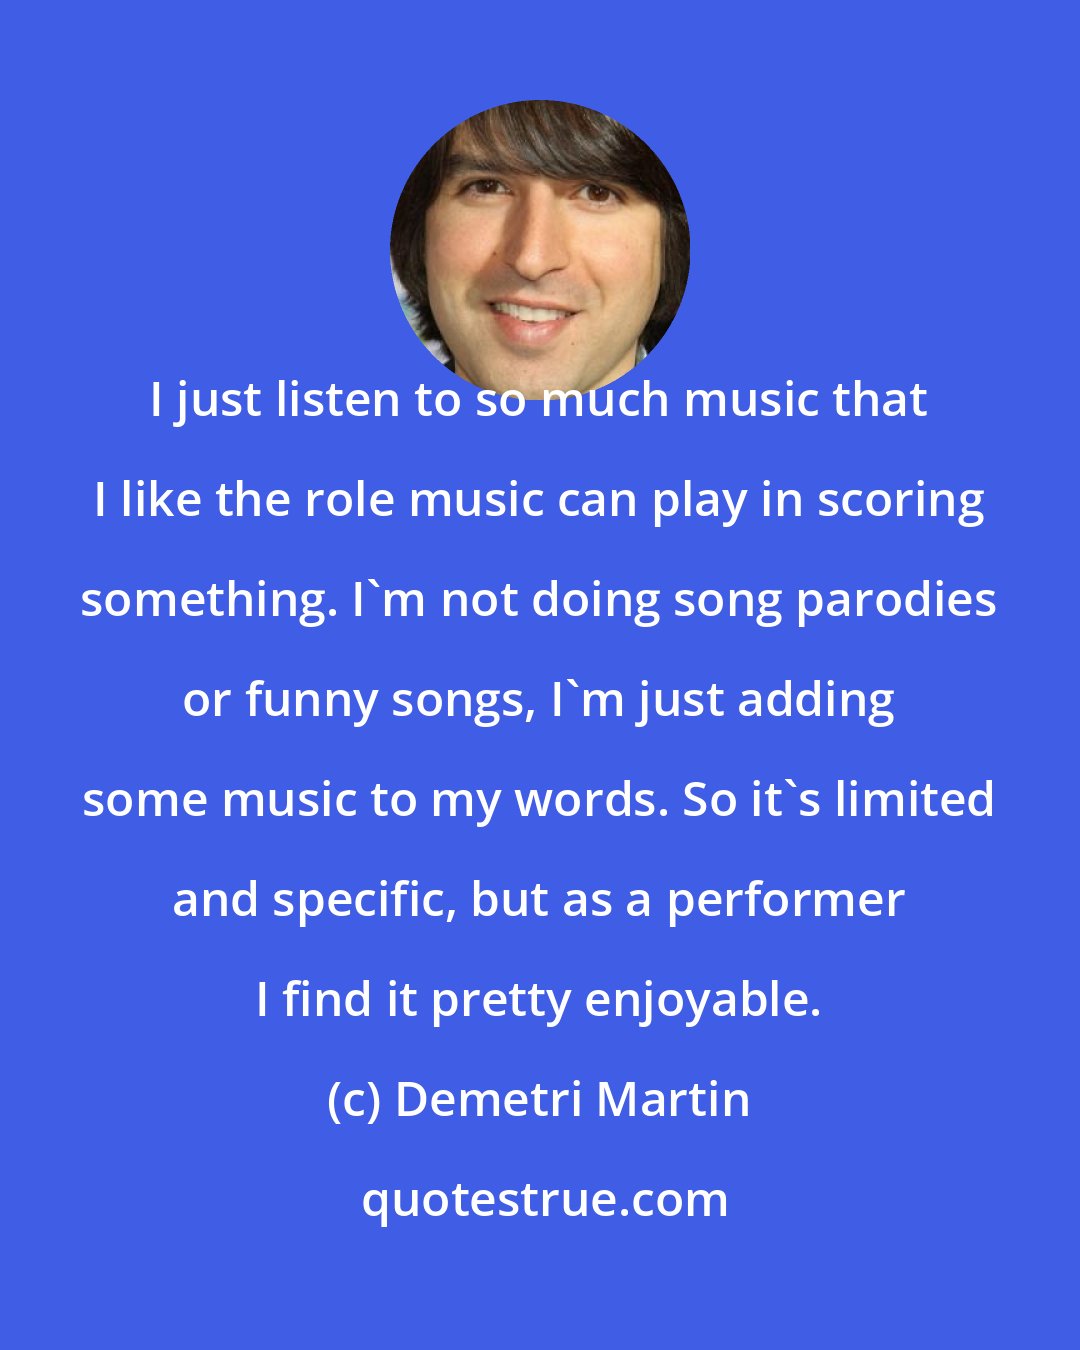 Demetri Martin: I just listen to so much music that I like the role music can play in scoring something. I'm not doing song parodies or funny songs, I'm just adding some music to my words. So it's limited and specific, but as a performer I find it pretty enjoyable.